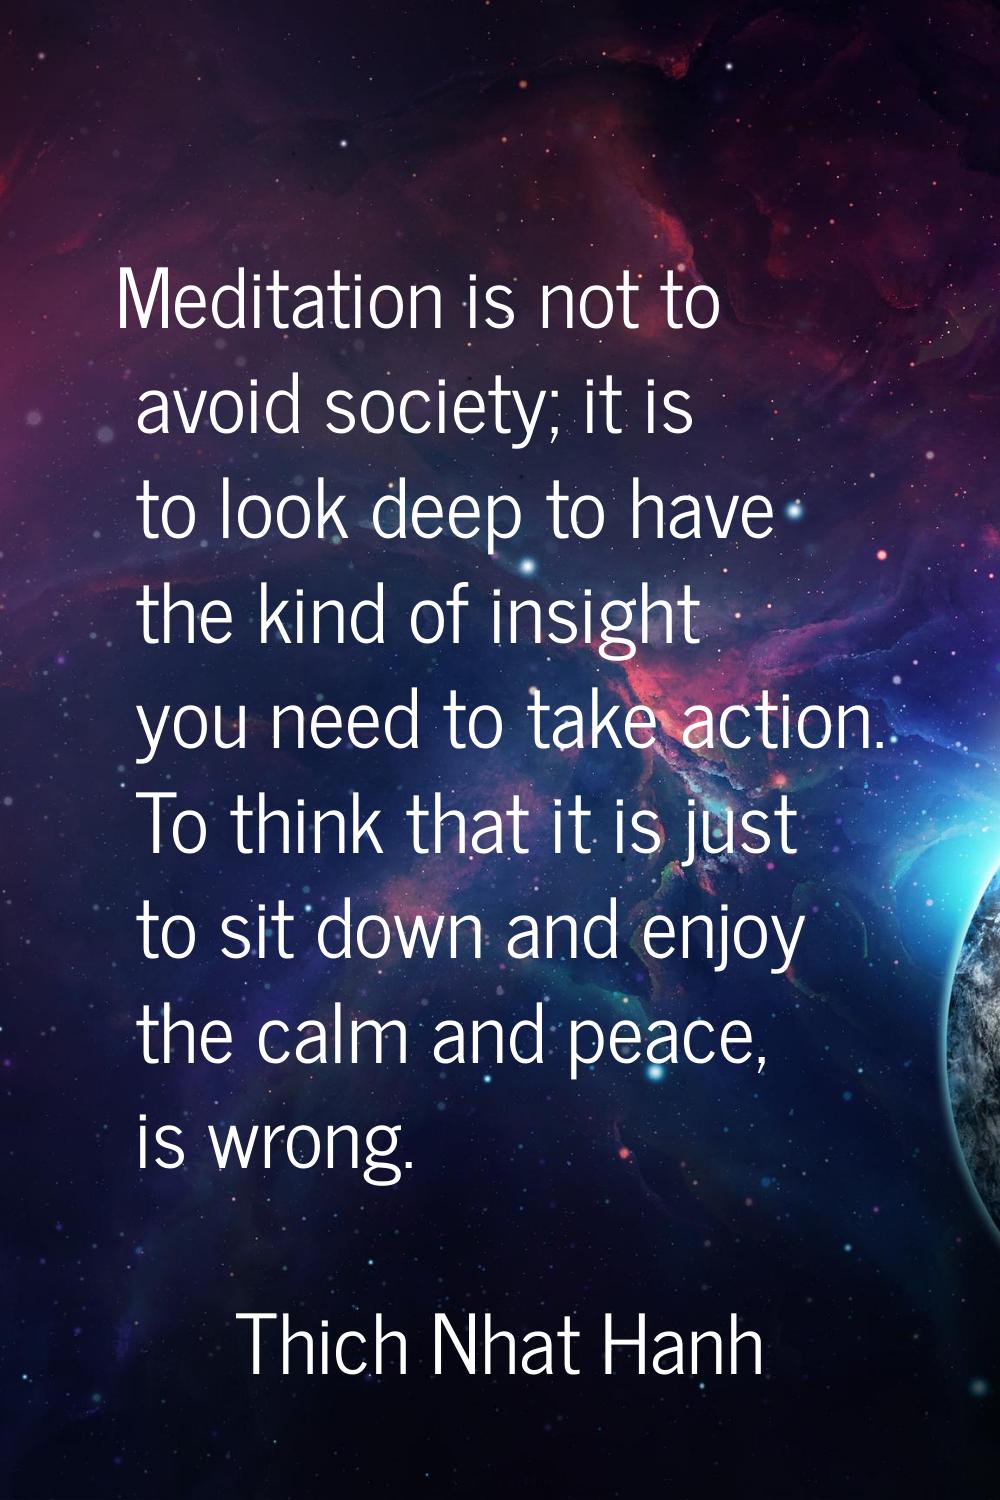 Meditation is not to avoid society; it is to look deep to have the kind of insight you need to take